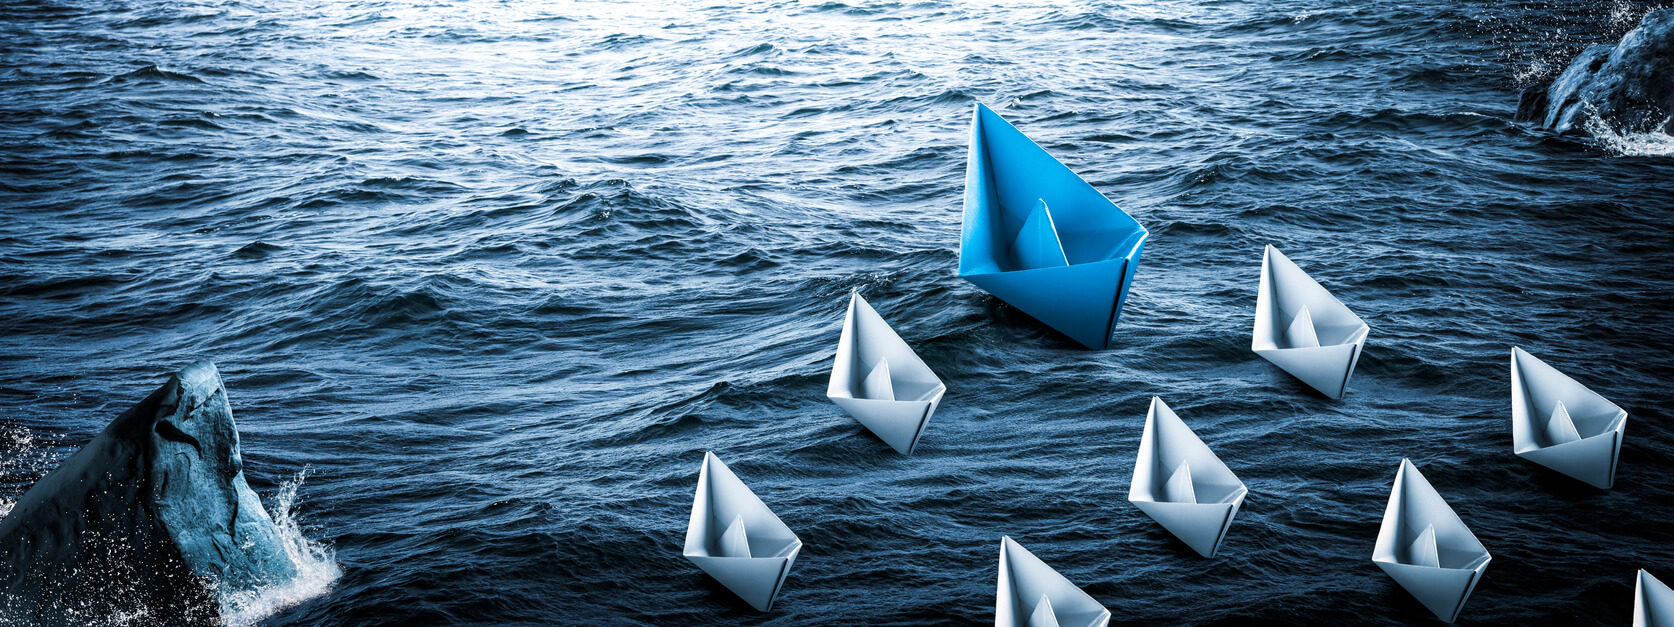 Blue Paper Boat Leading A Fleet Of Small White Boats